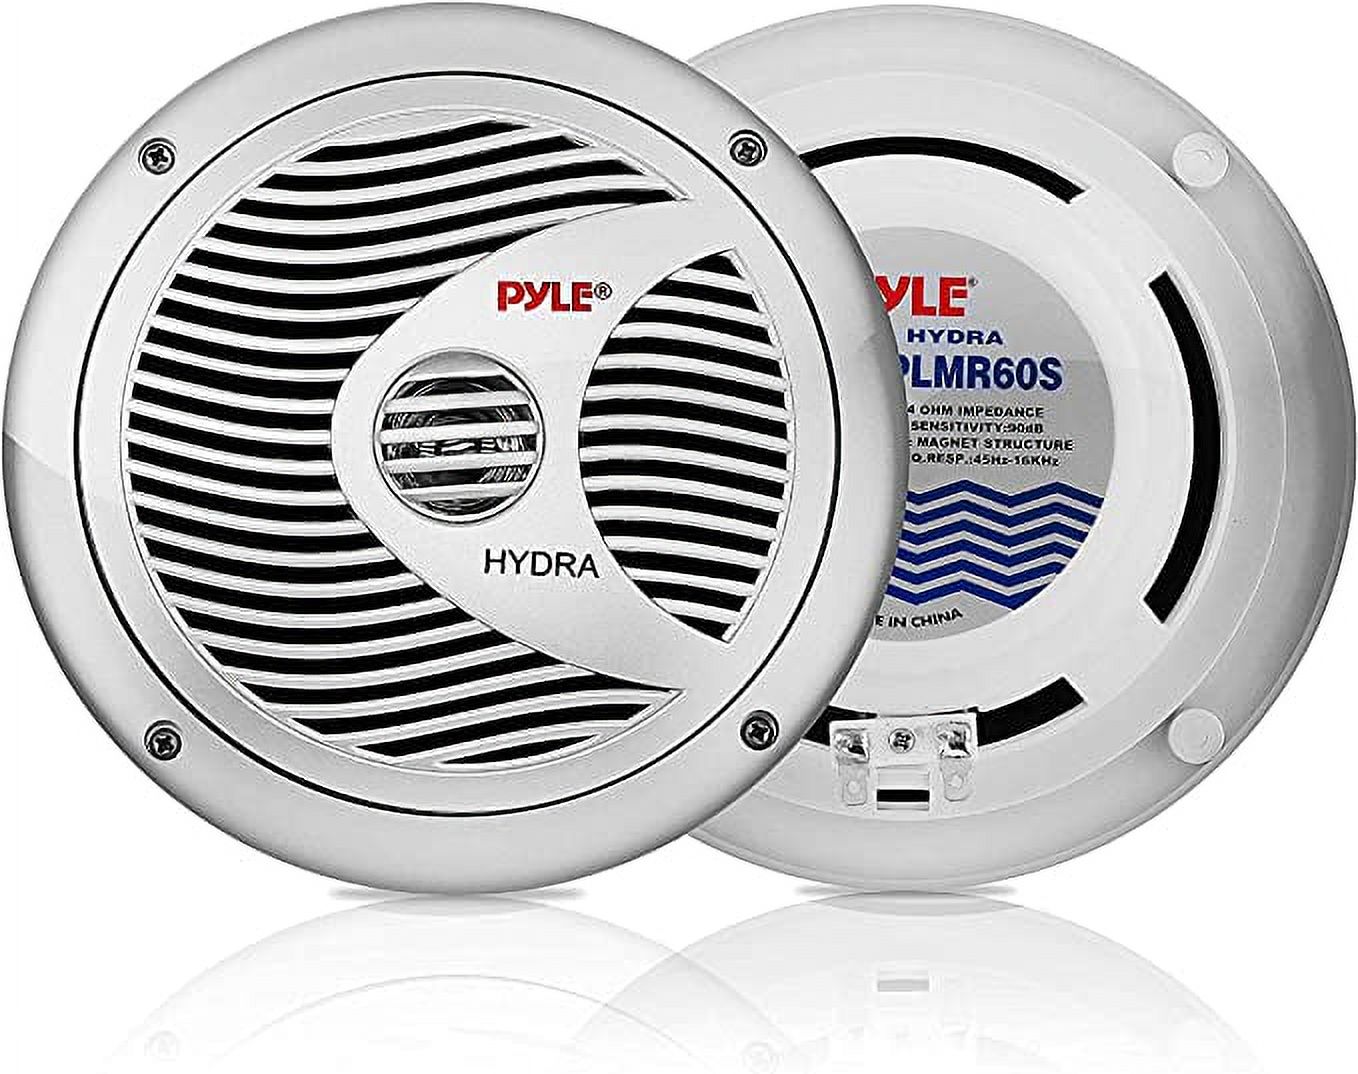 Pyle 6.5” Dual Marine Speaker 2Way Waterproof & Weather Resistant Outdoor Audio Stereo Sound System - image 1 of 7